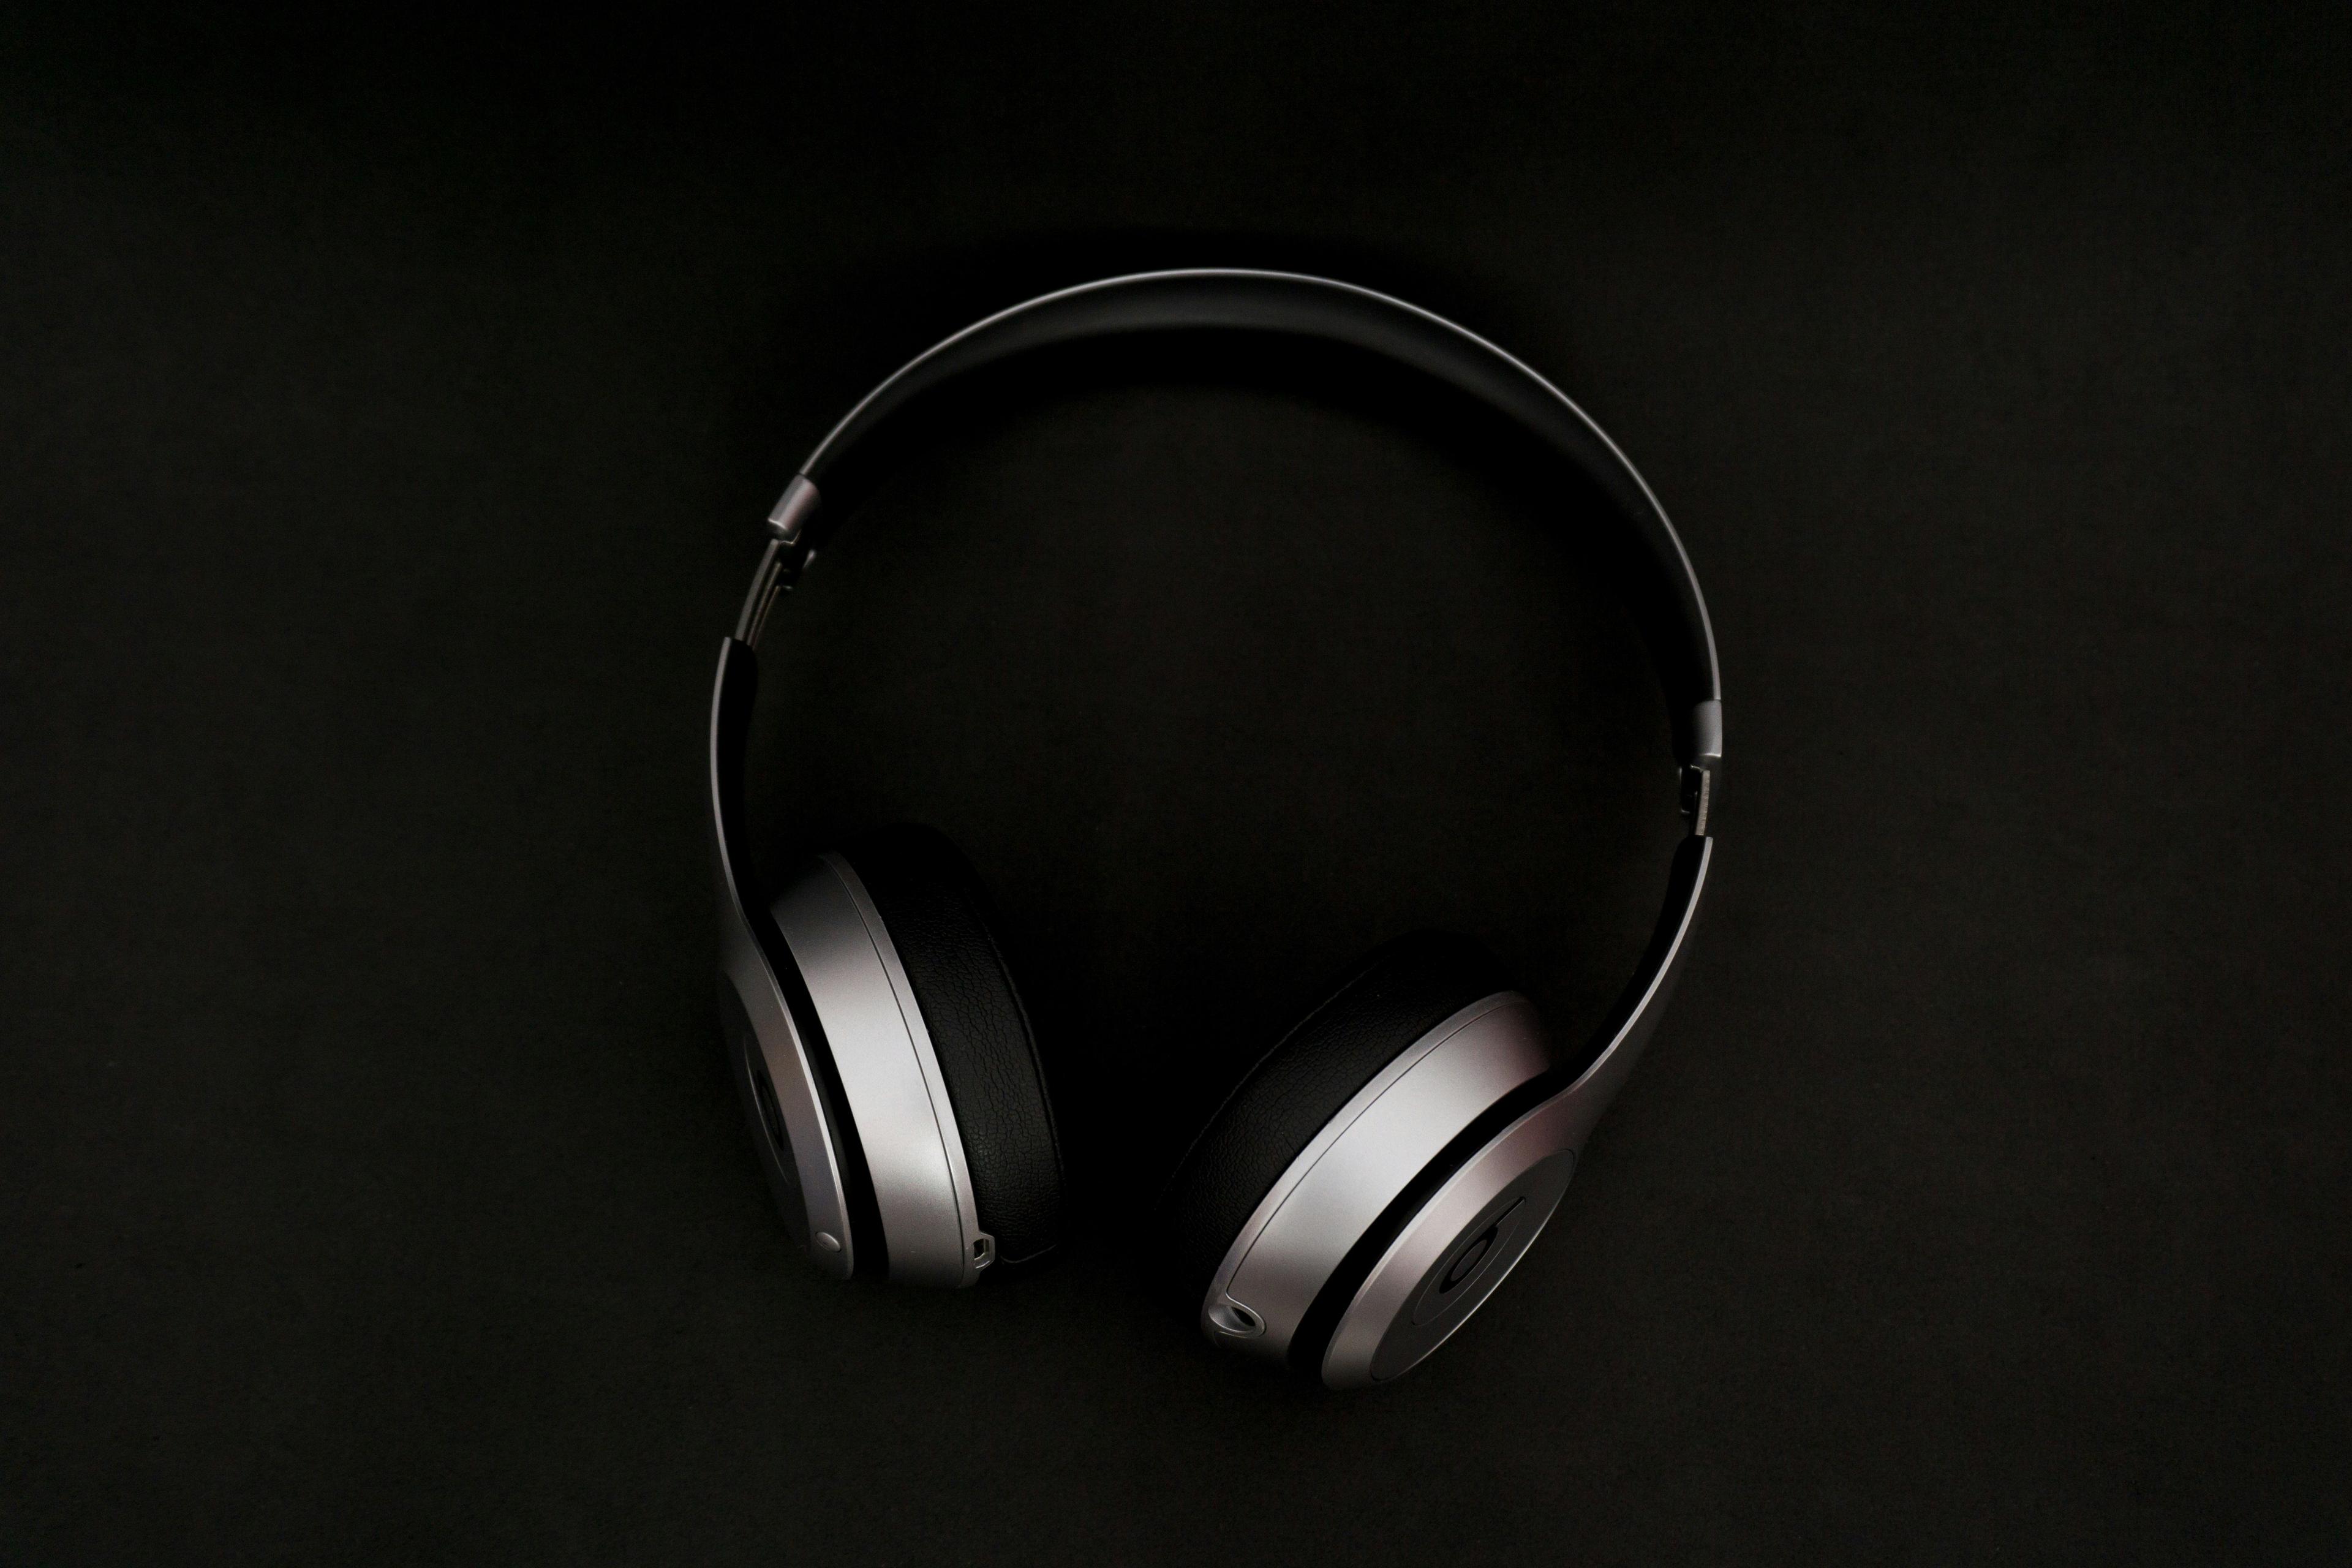 Experience high-quality audio with SonusBeat Pro. These wireless over-ear headphones deliver rich sound and deep bass. The ergonomic design provides comfort during extended listening sessions. With Bluetooth connectivity and a long battery life, you can enjoy your favorite music wirelessly for hours.